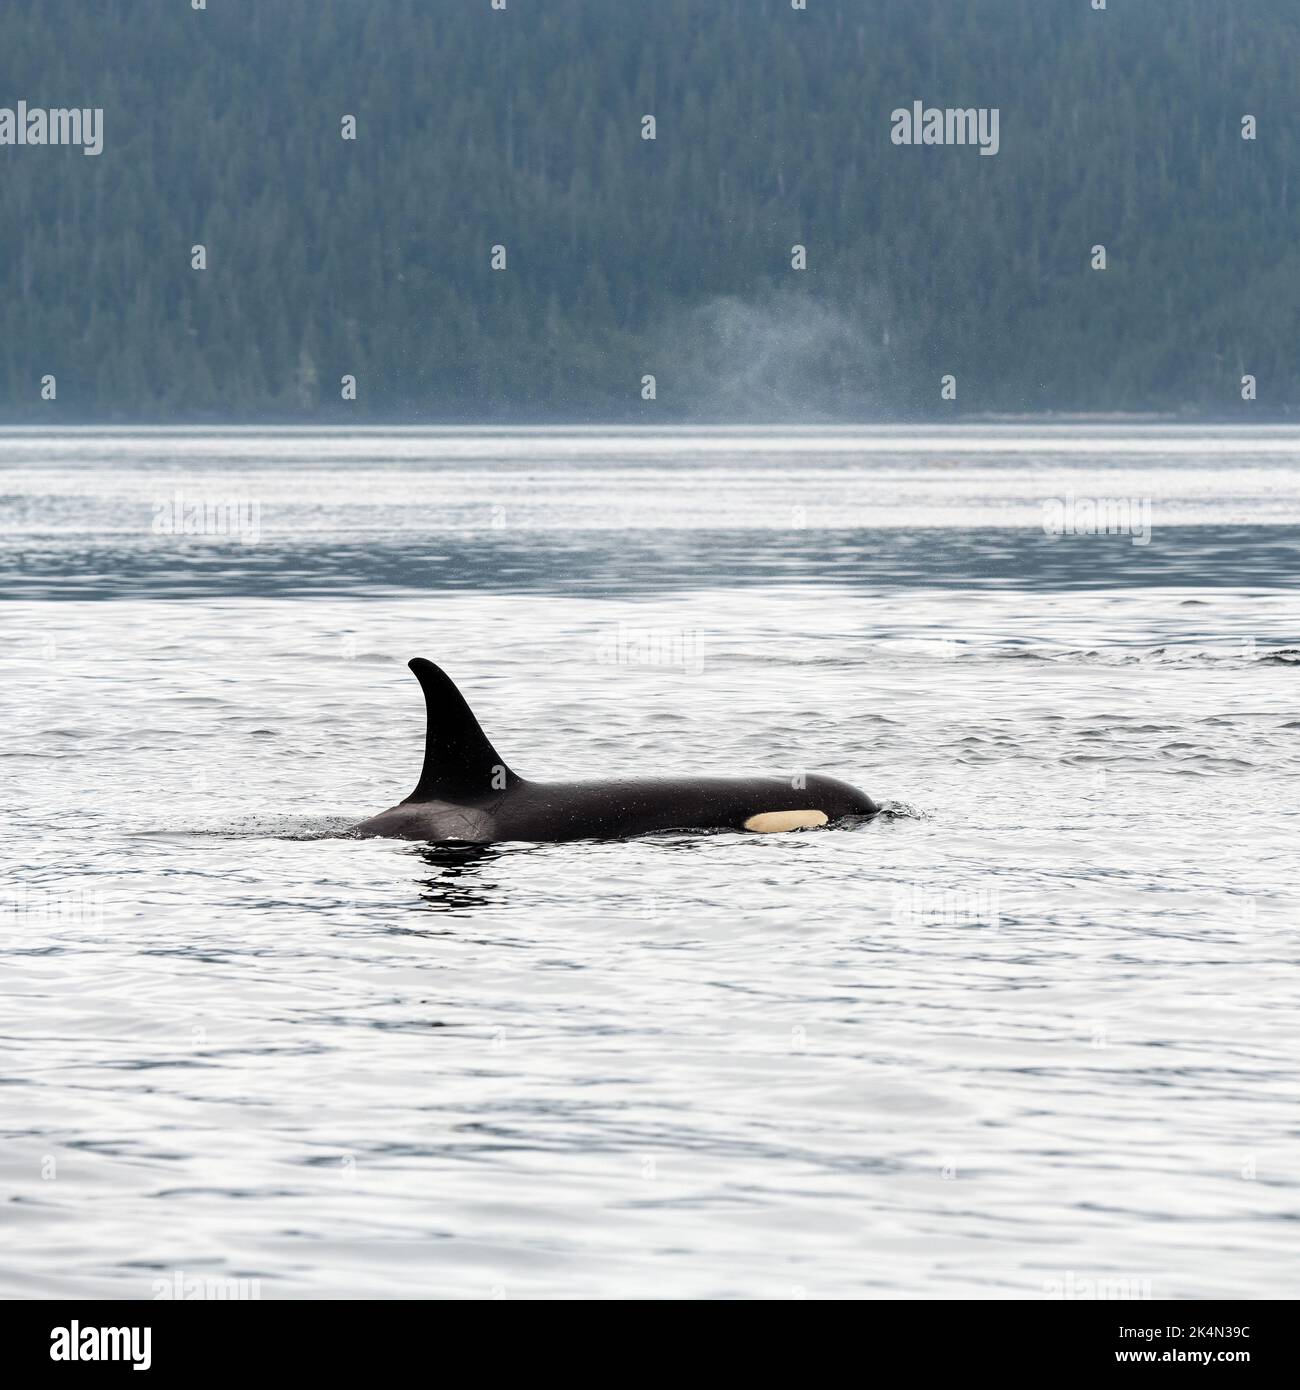 Orca or killer whale (Orcinus orca) exhaling air, Telegraph Cove, Vancouver Island, British Columbia, Canada. Stock Photo